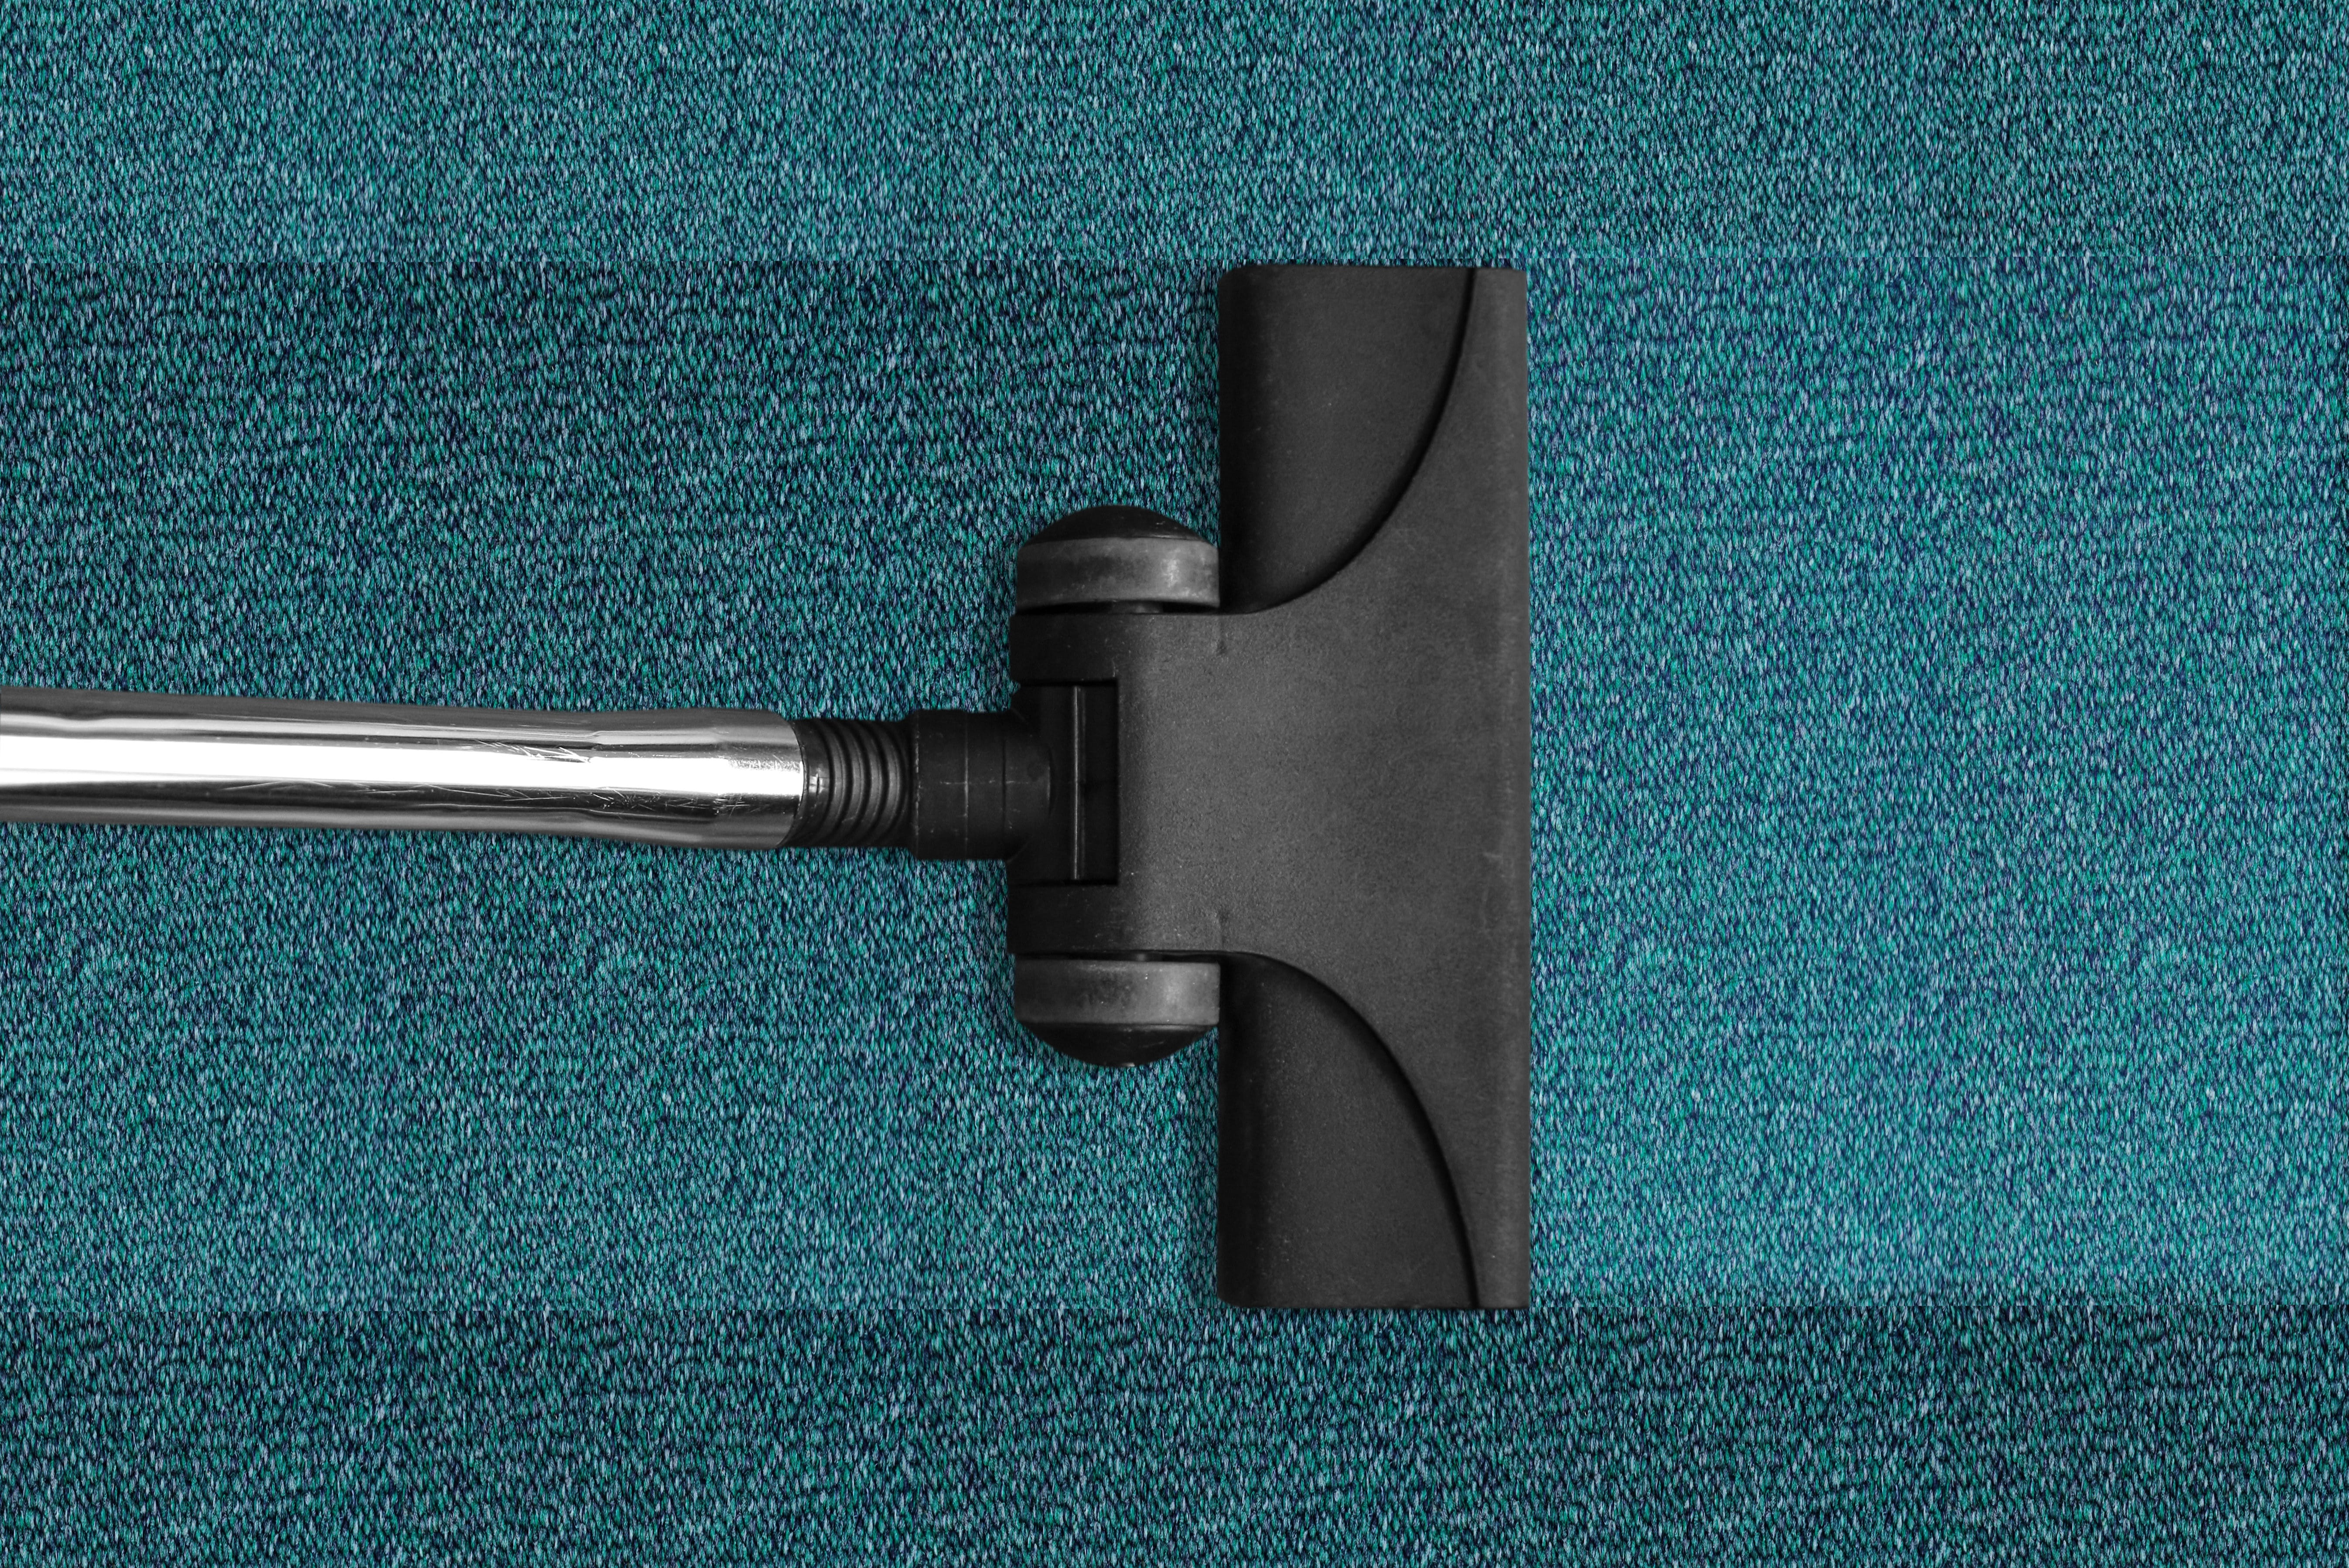 black and gray steam mop on blue mat, silver steel, vacuum cleaner